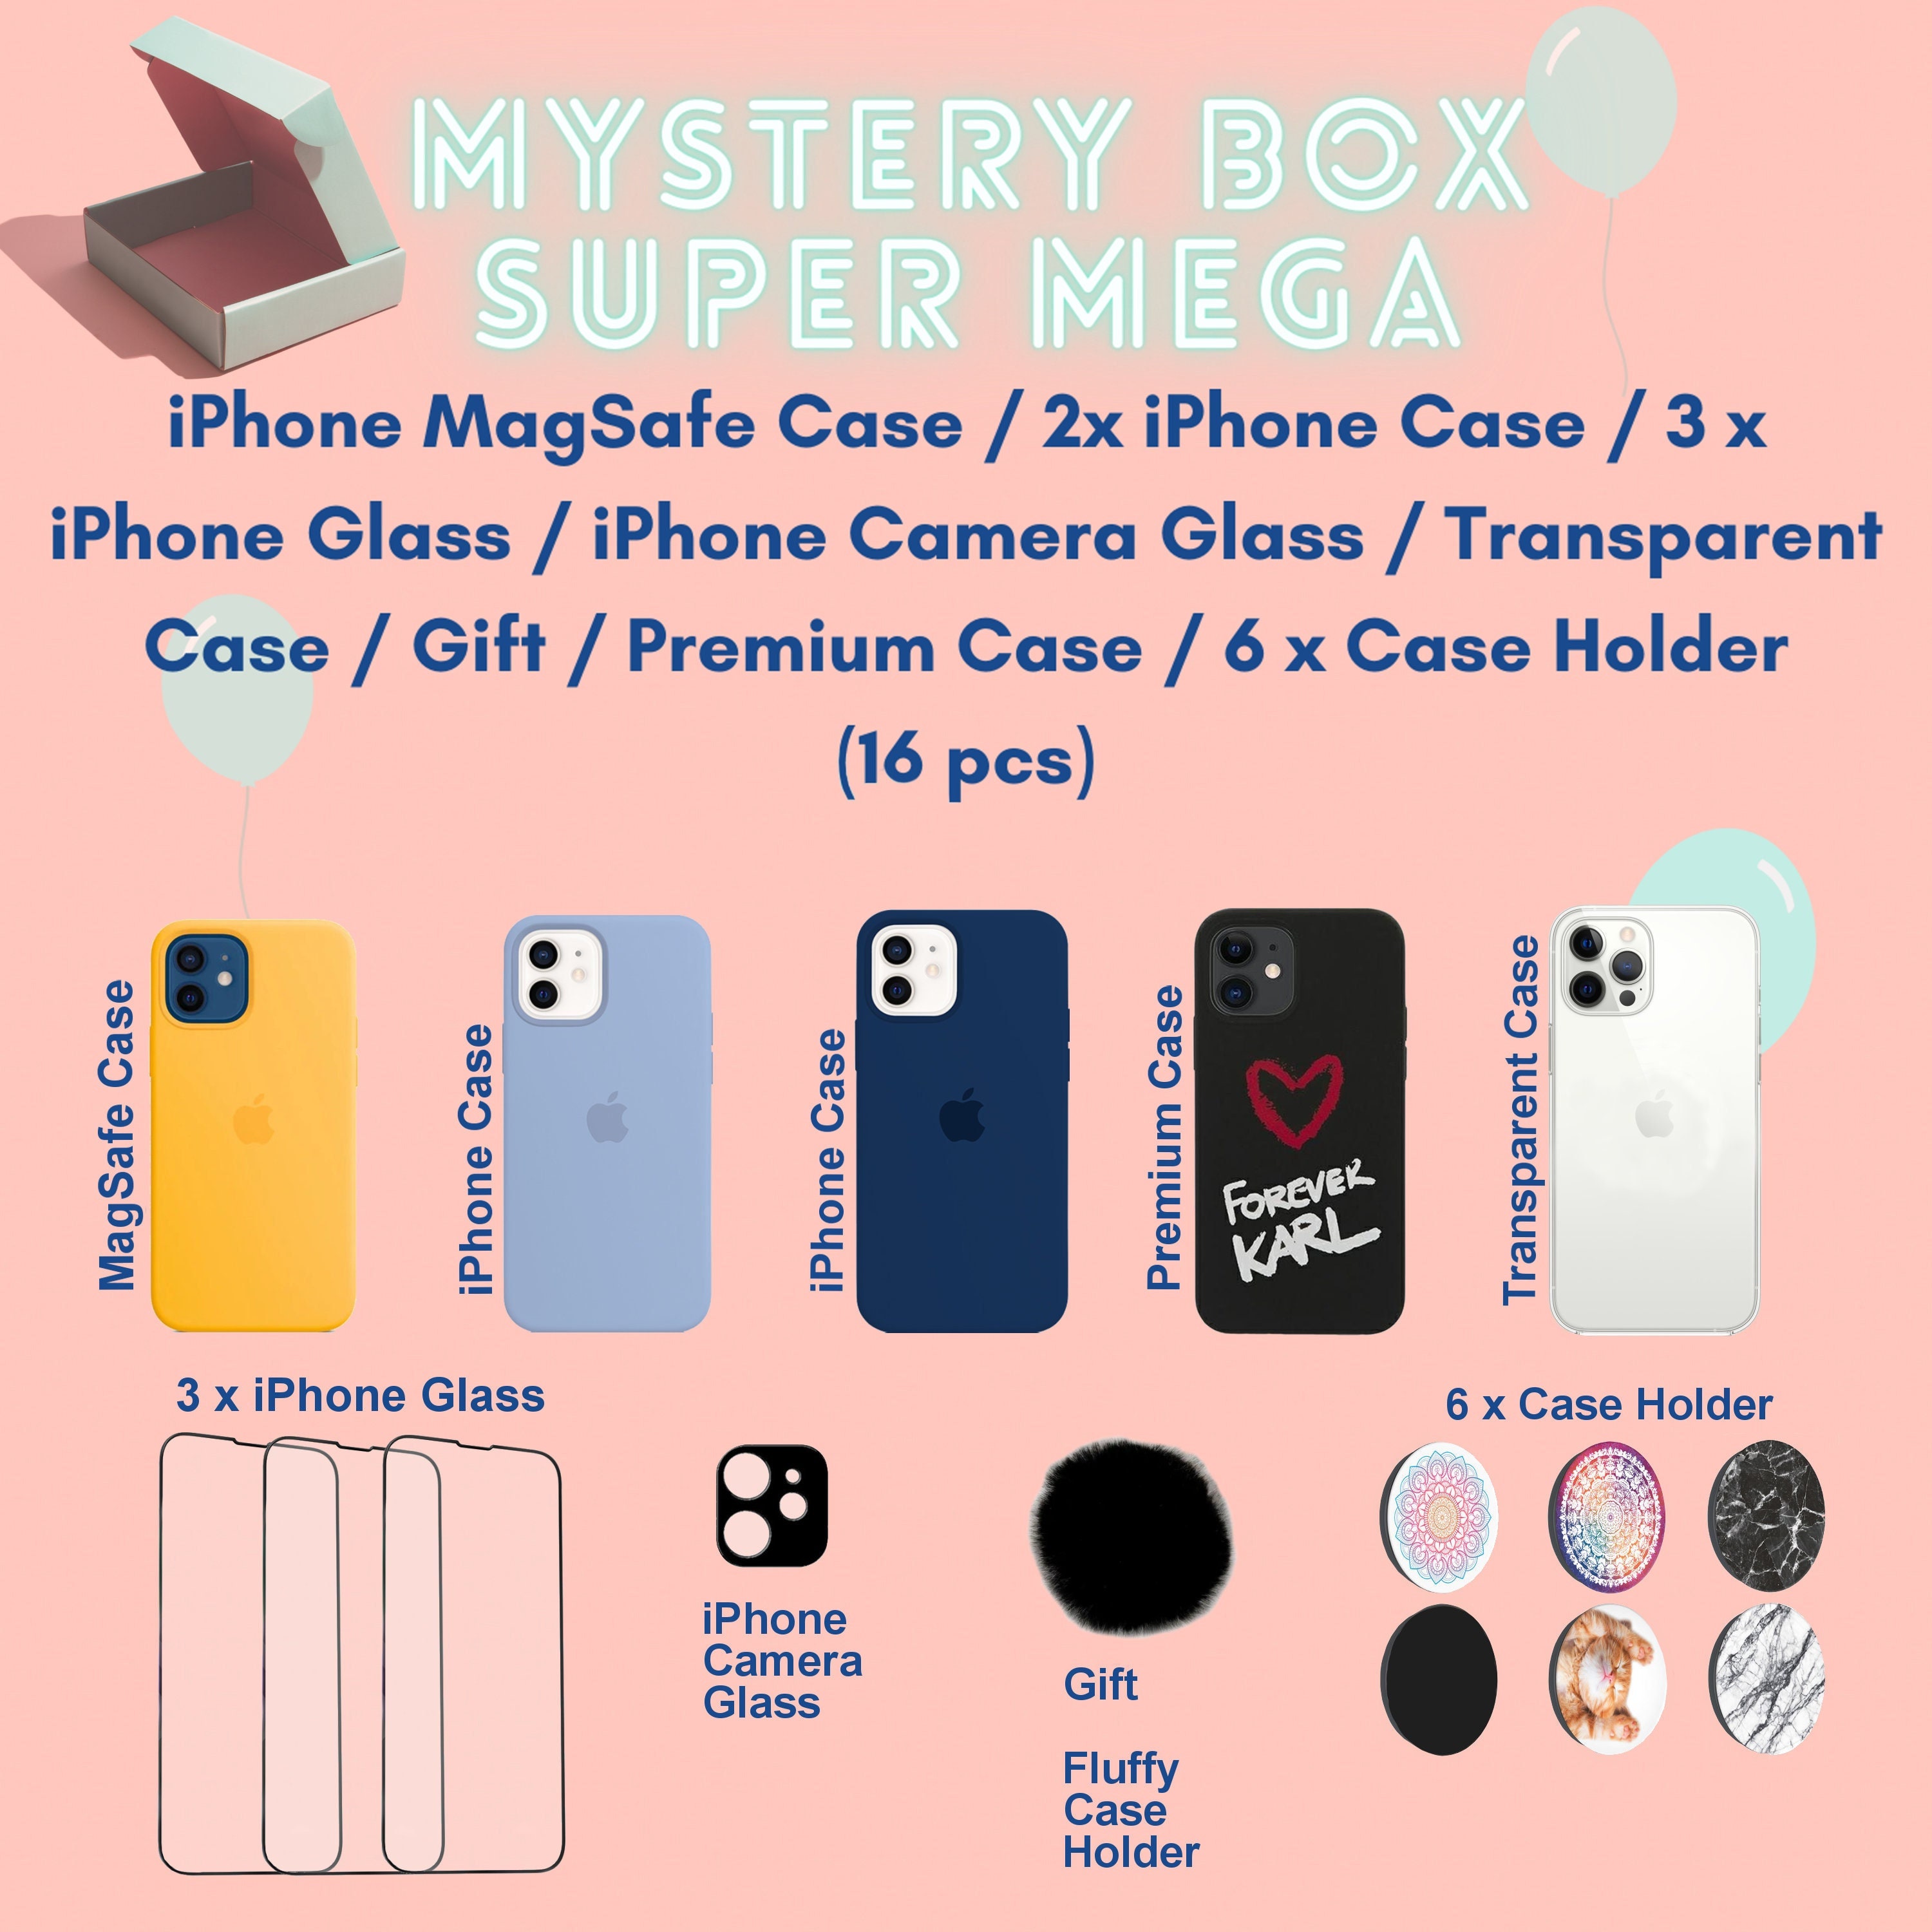 Unclaimed Apple Mystery Box – Giftaver, mystery box  